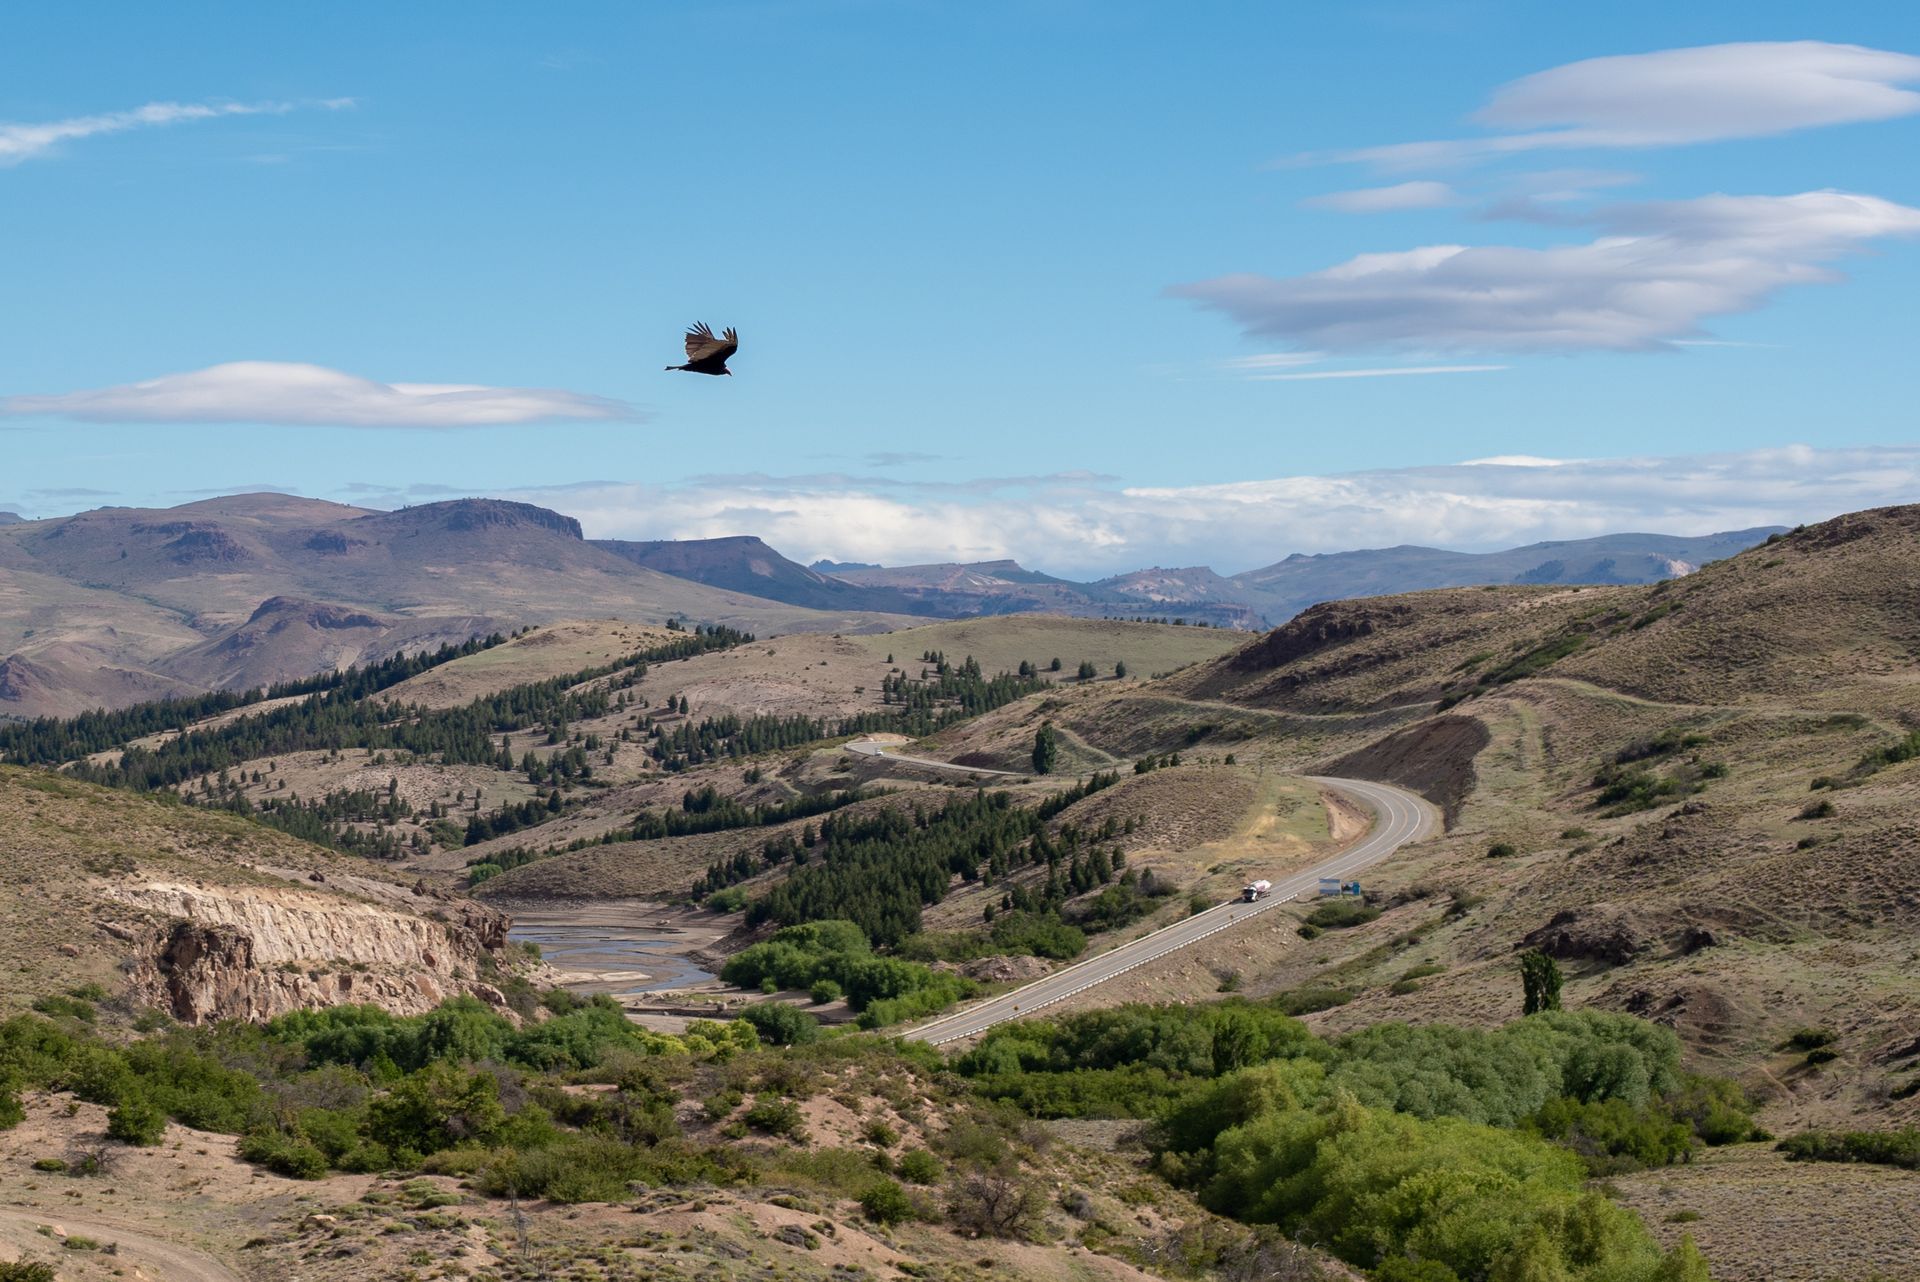 A bird is flying over a valley with mountains in the background.